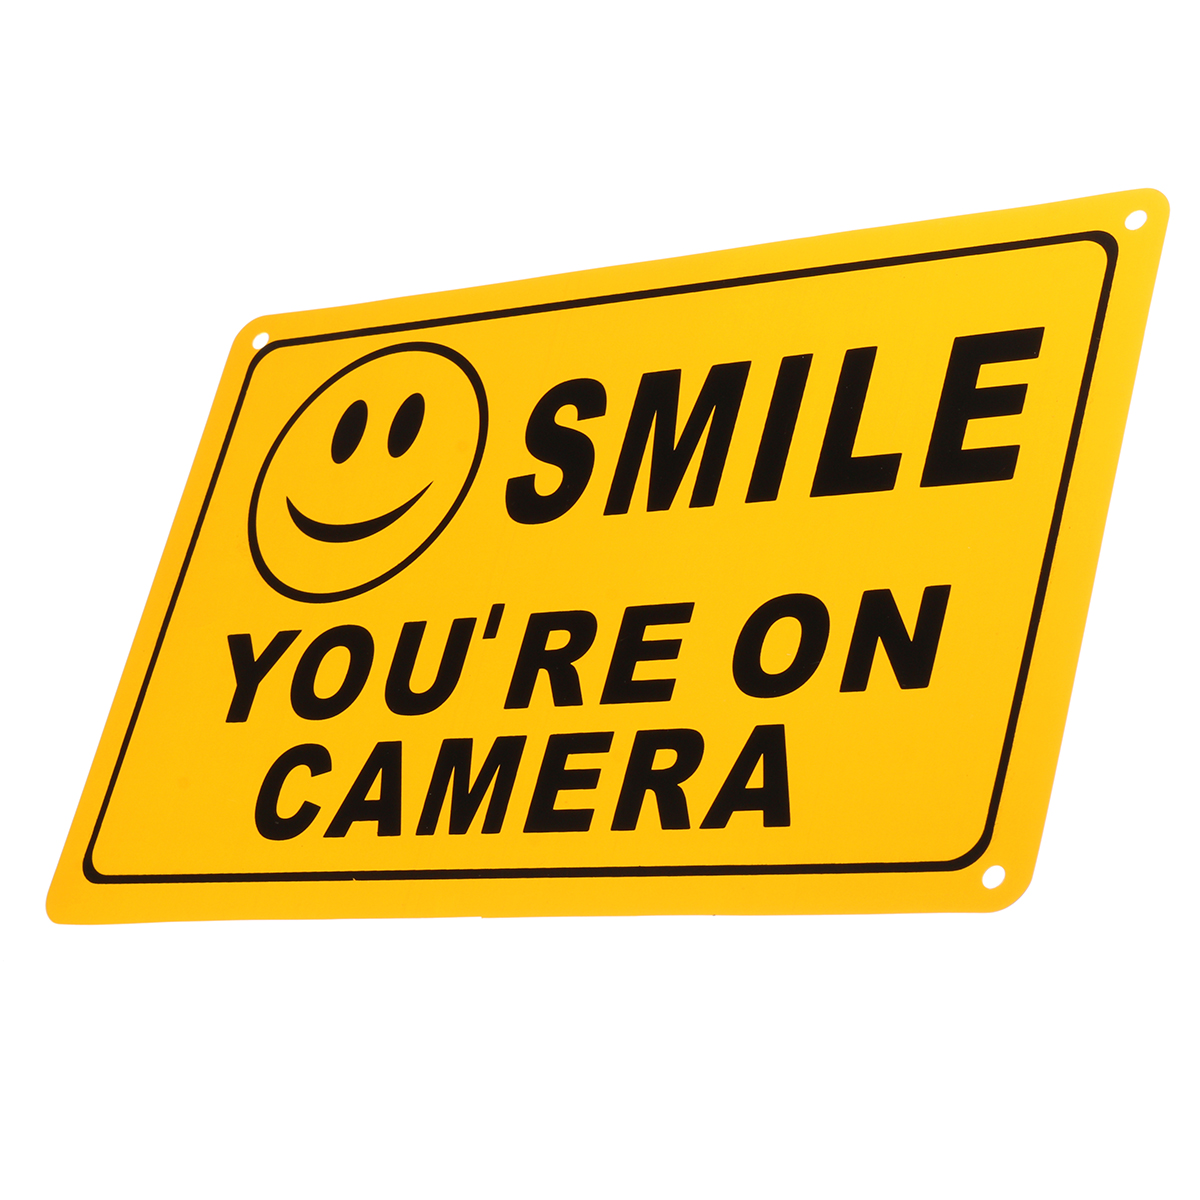 2Pcs-SMILE-YOURE-ON-CAMERA-Warning-Security-Yellow-Sign-CCTV-Video-Surveillance-Camera-Sticker-28x18-1180754-6